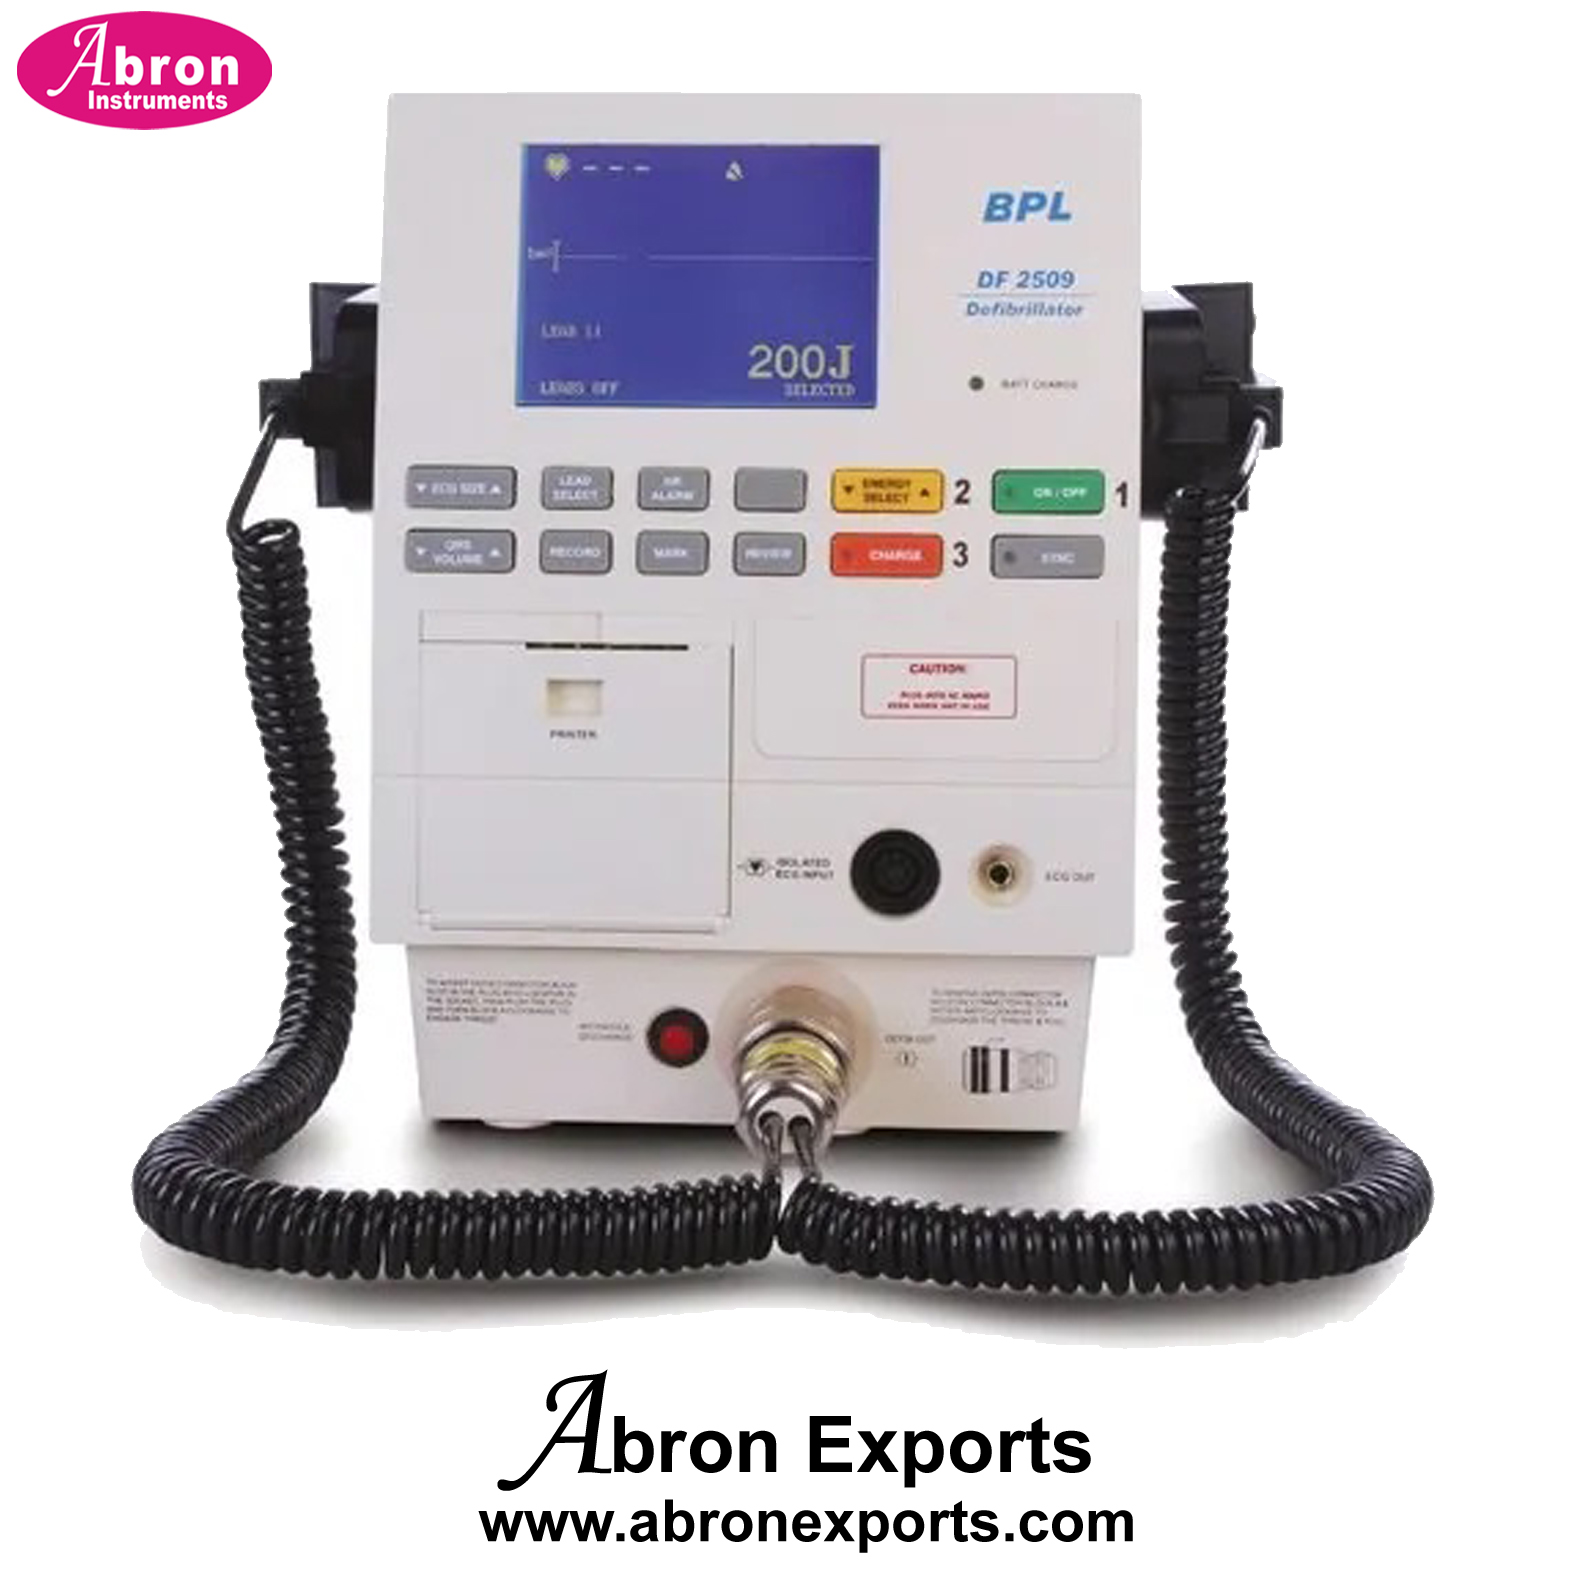 Defibrillator BPL Monophasic with AED and for ICU Cardiac Hospital Medical Nursing Home Abron ABM-2511BP 